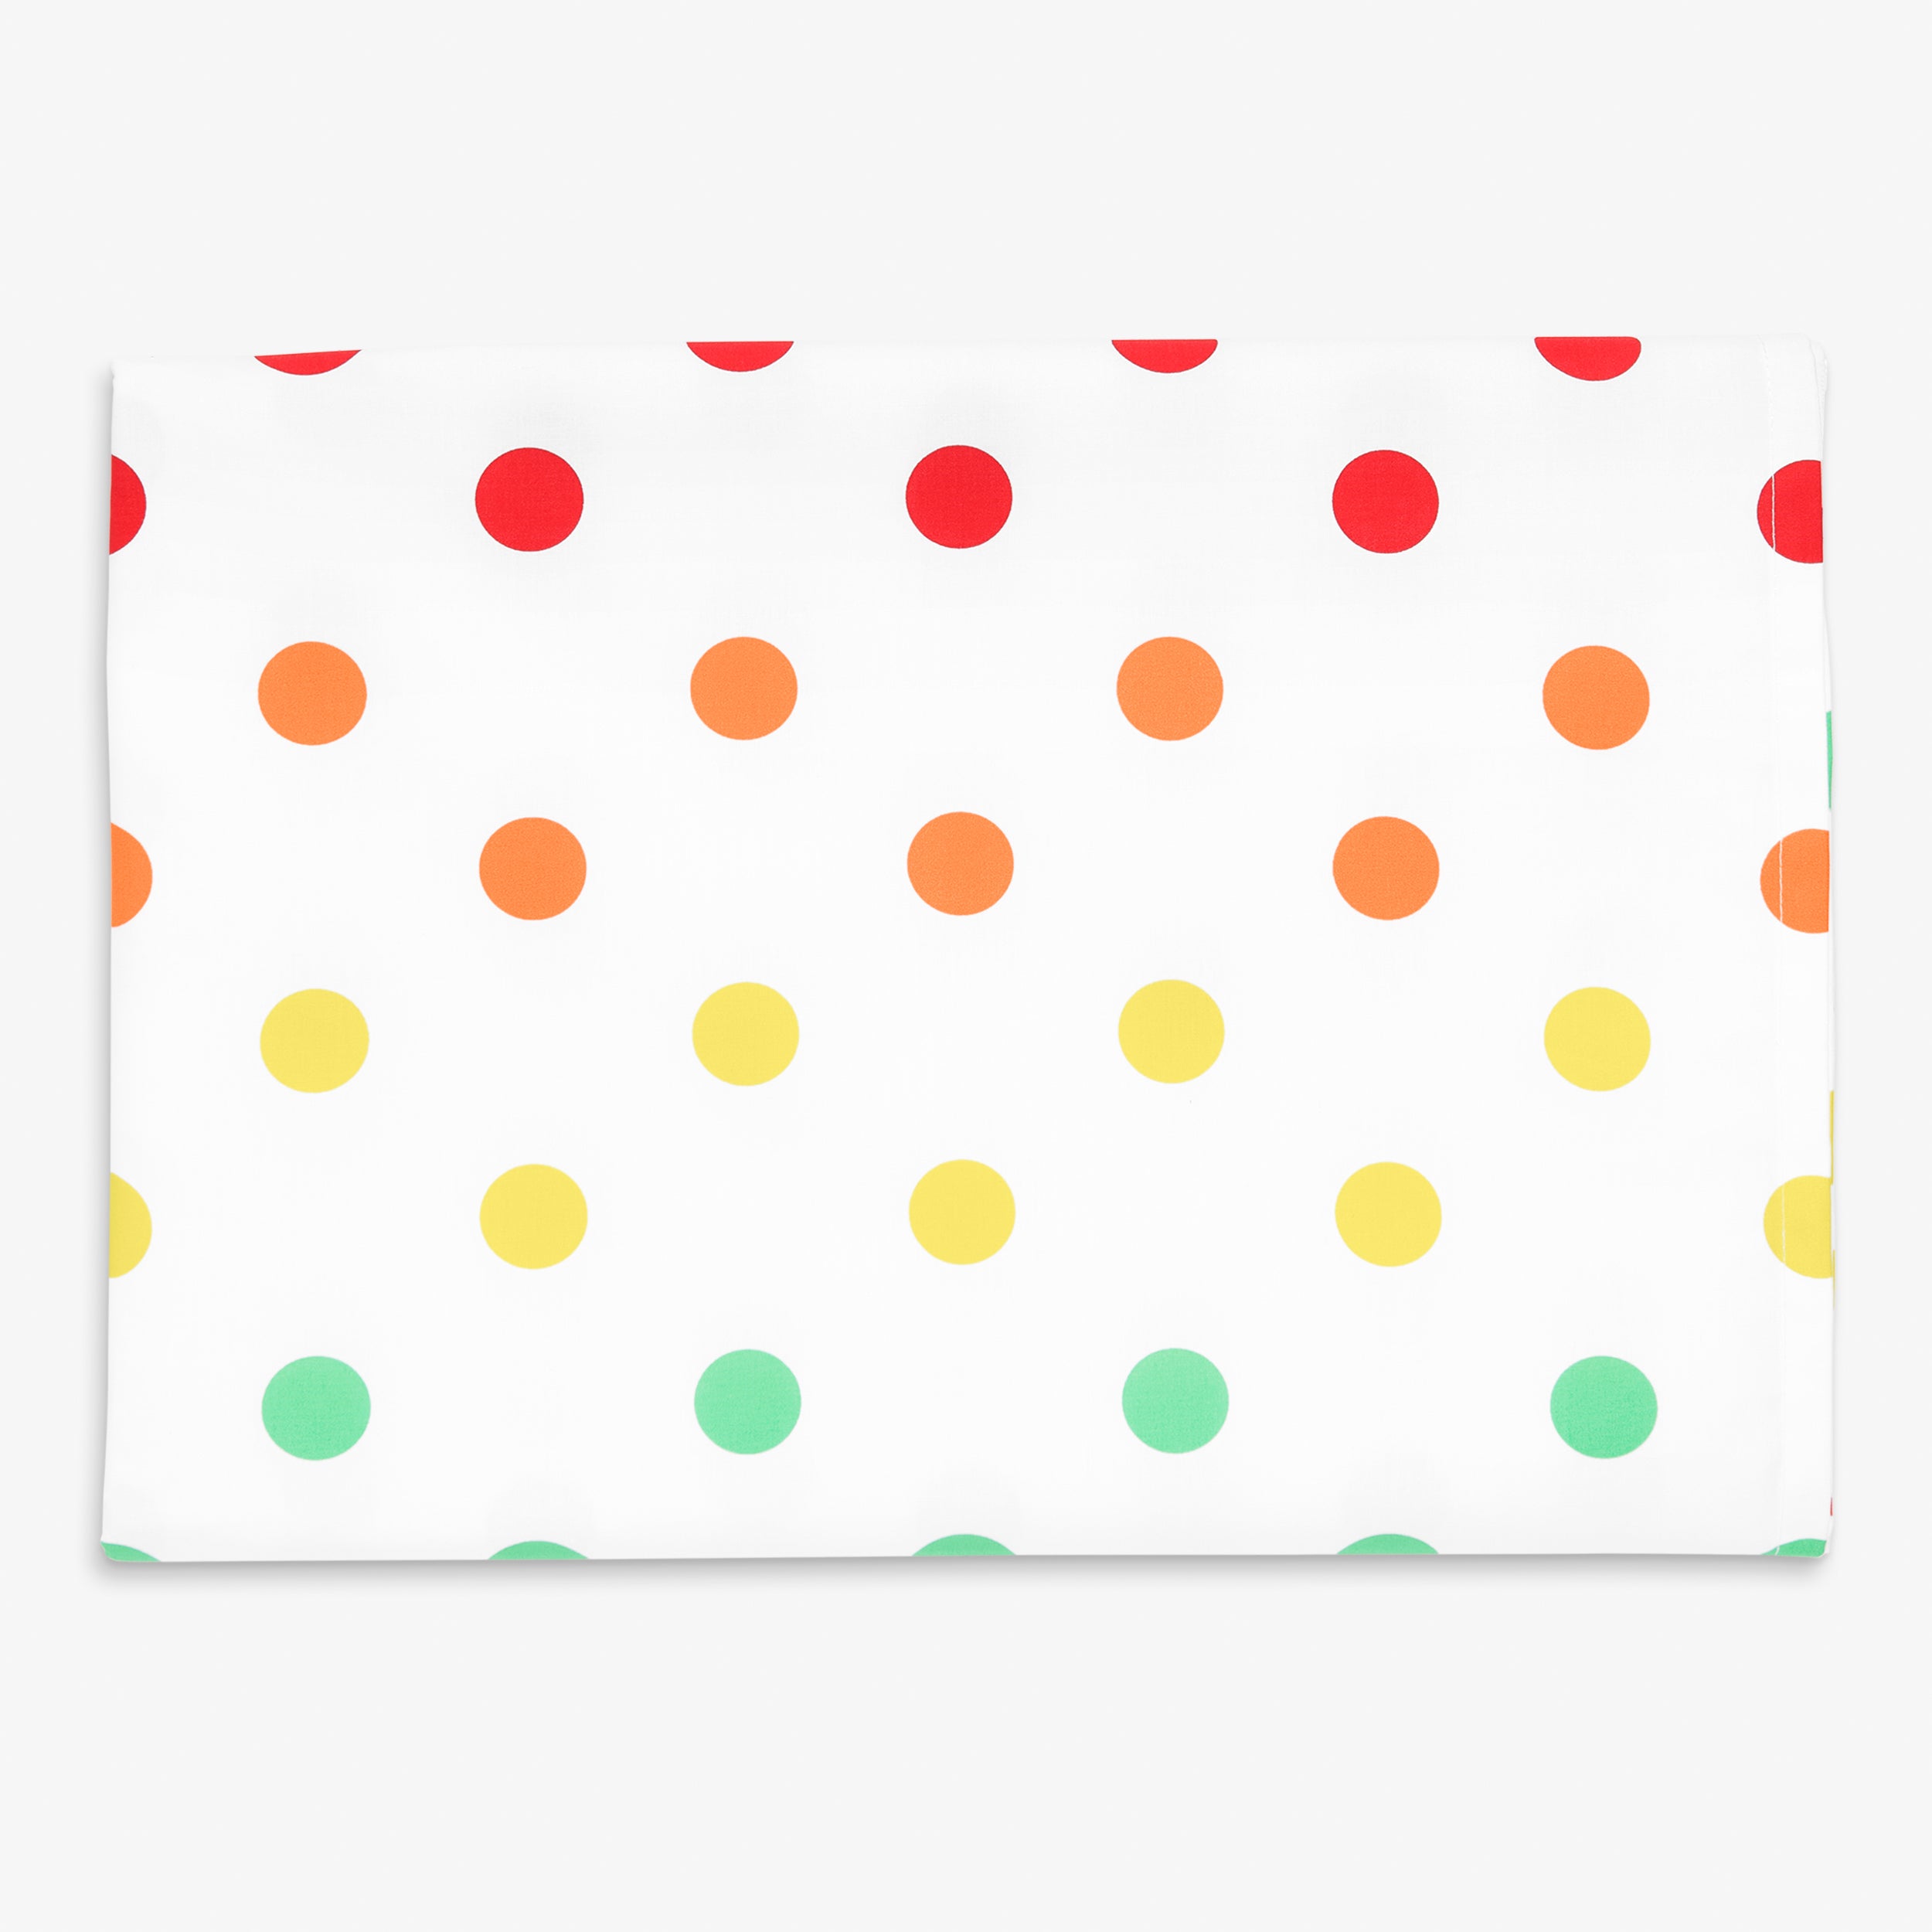 Kids twin fitted sheet